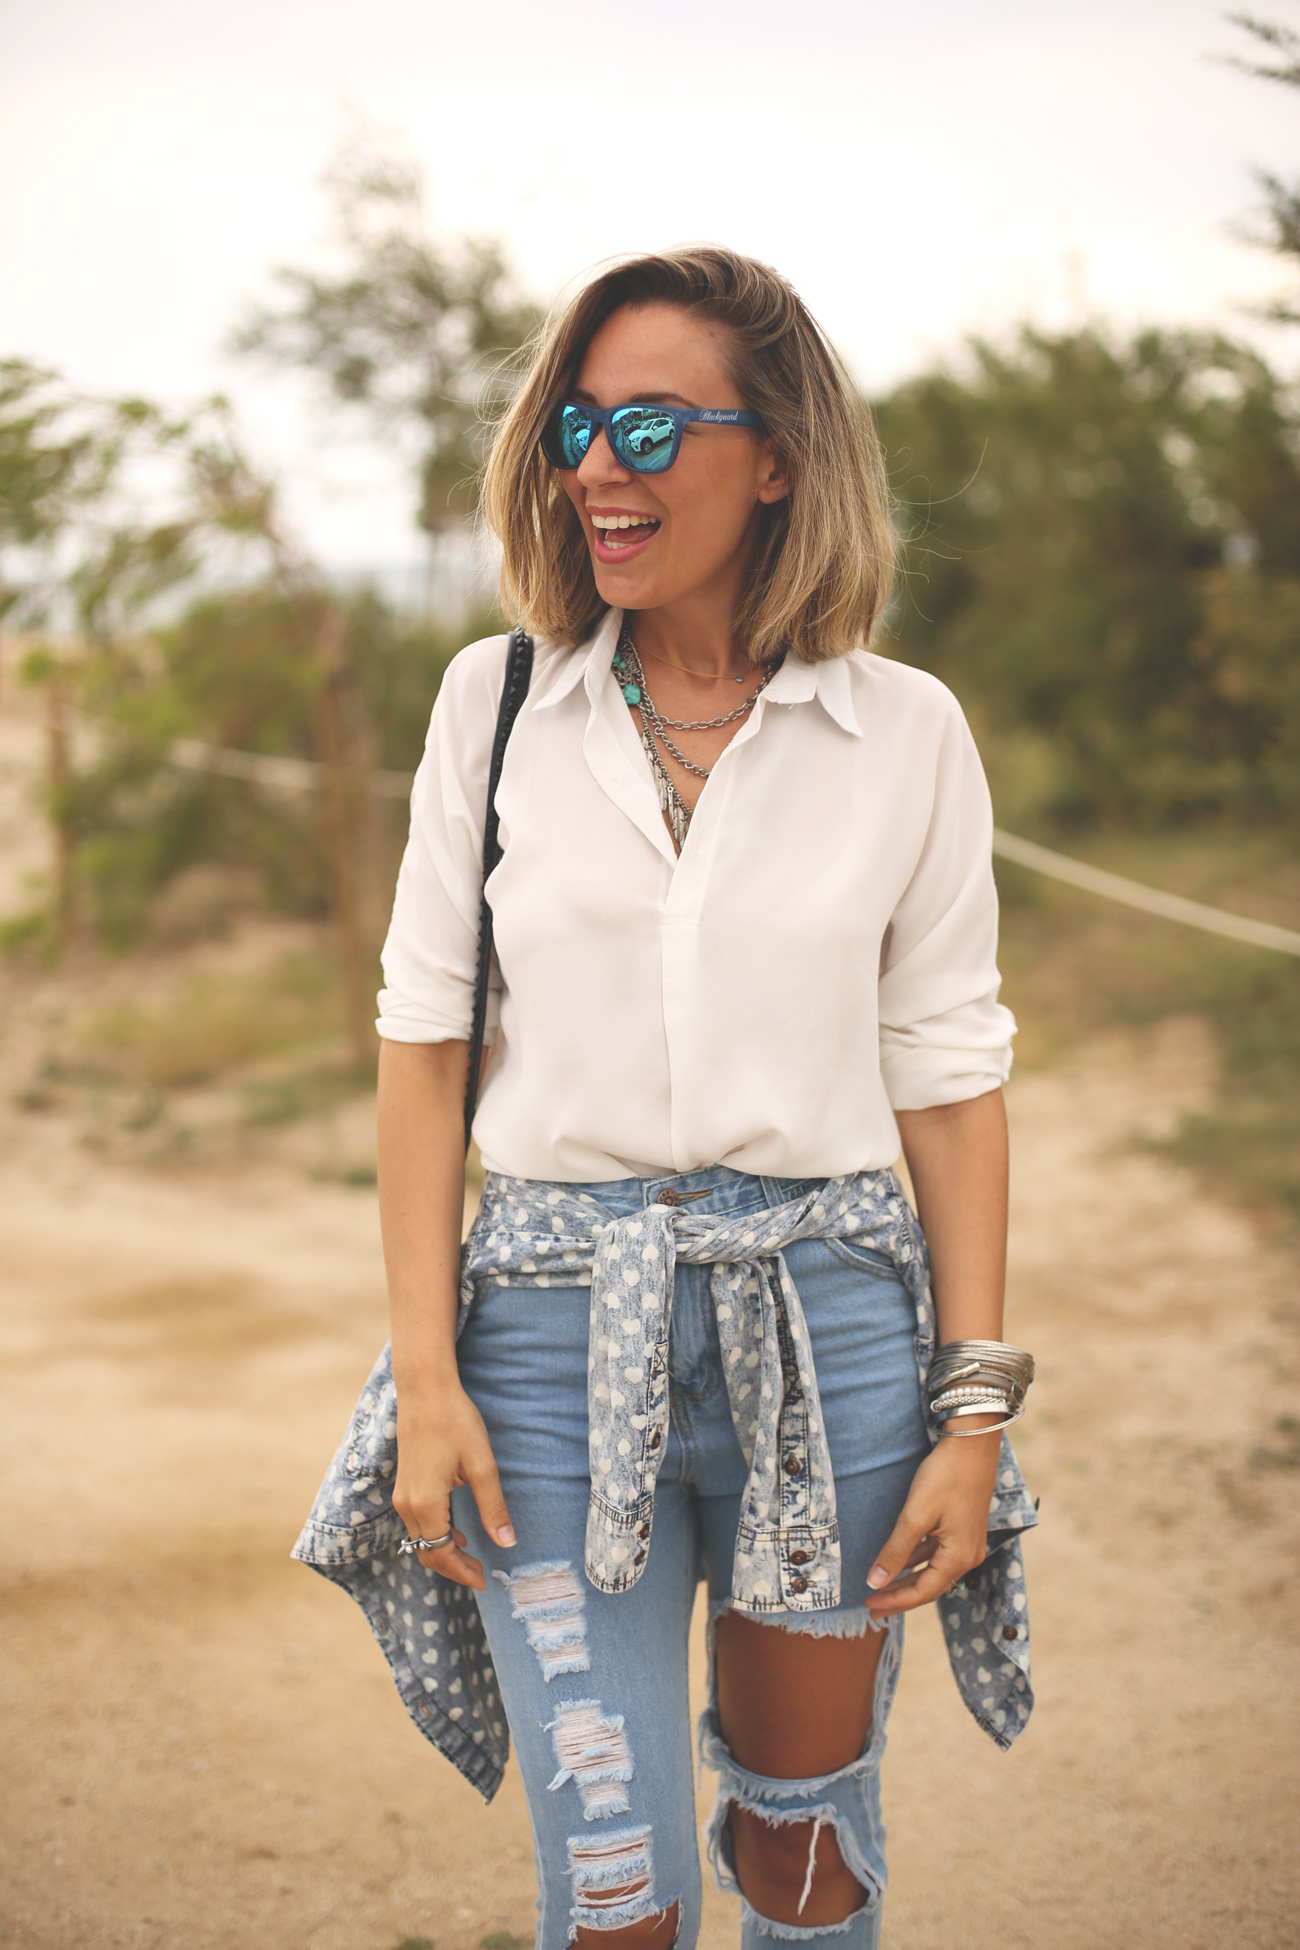 Mum Jeans, ripped jeans, white shirt, silver jewelry, baby blue heels, mirror sunglasses, blackguard 64